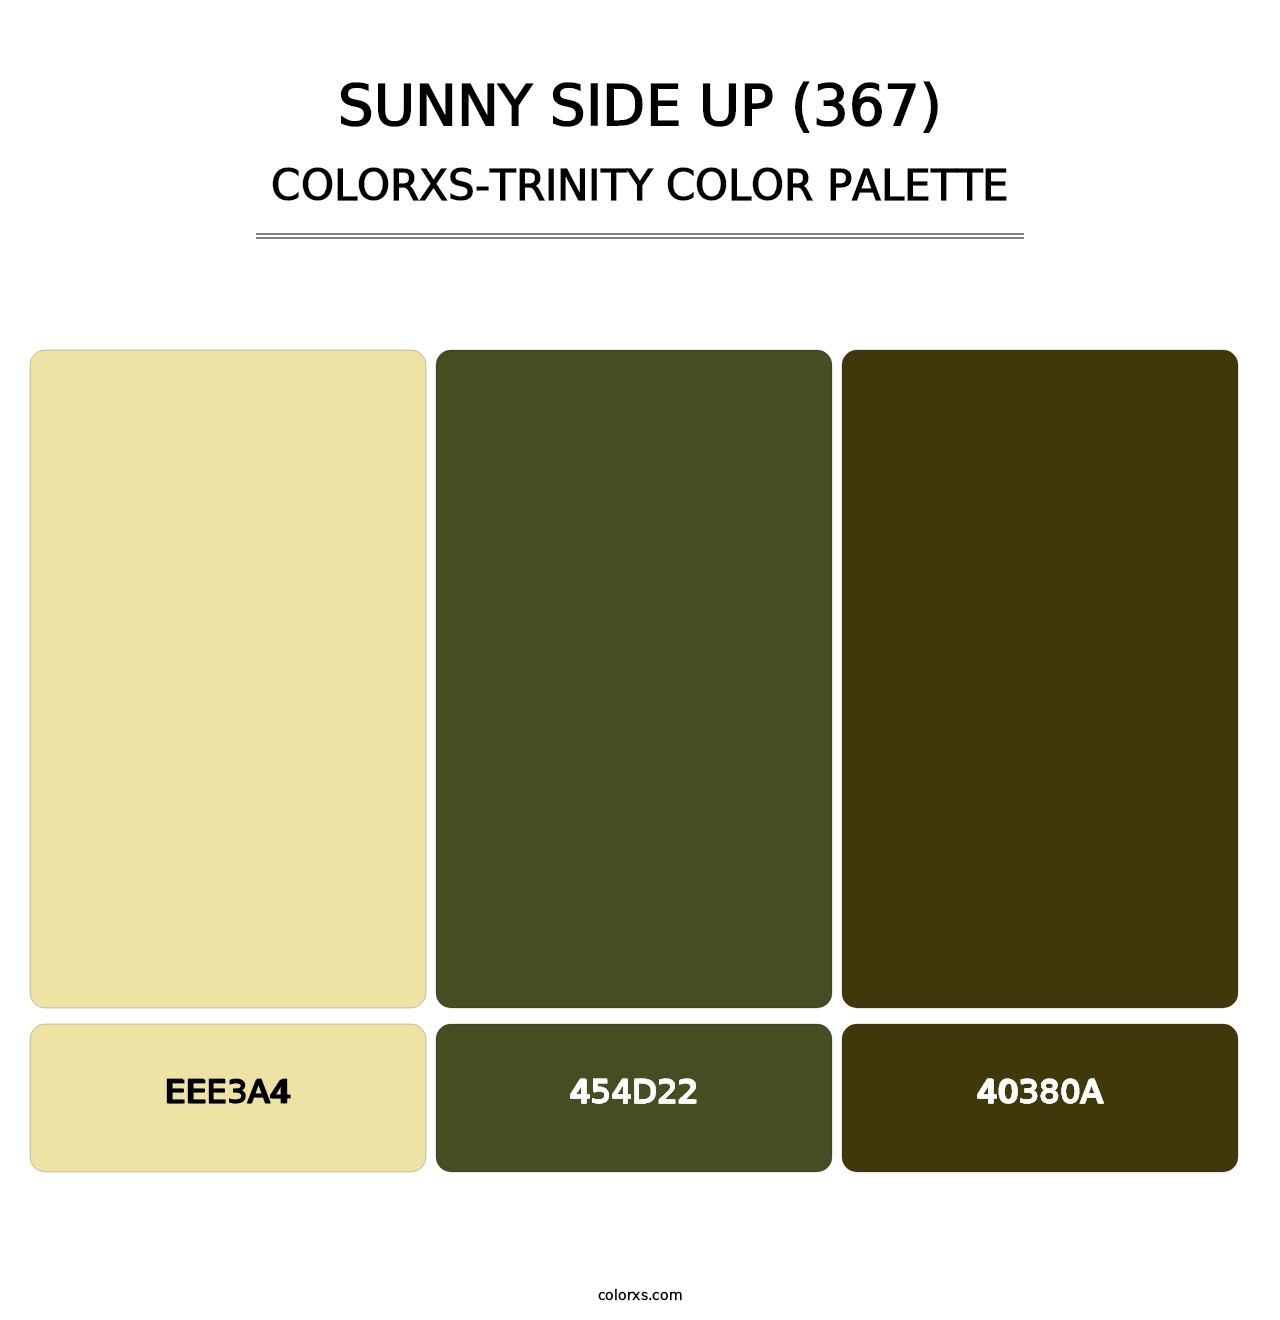 Sunny Side Up (367) - Colorxs Trinity Palette